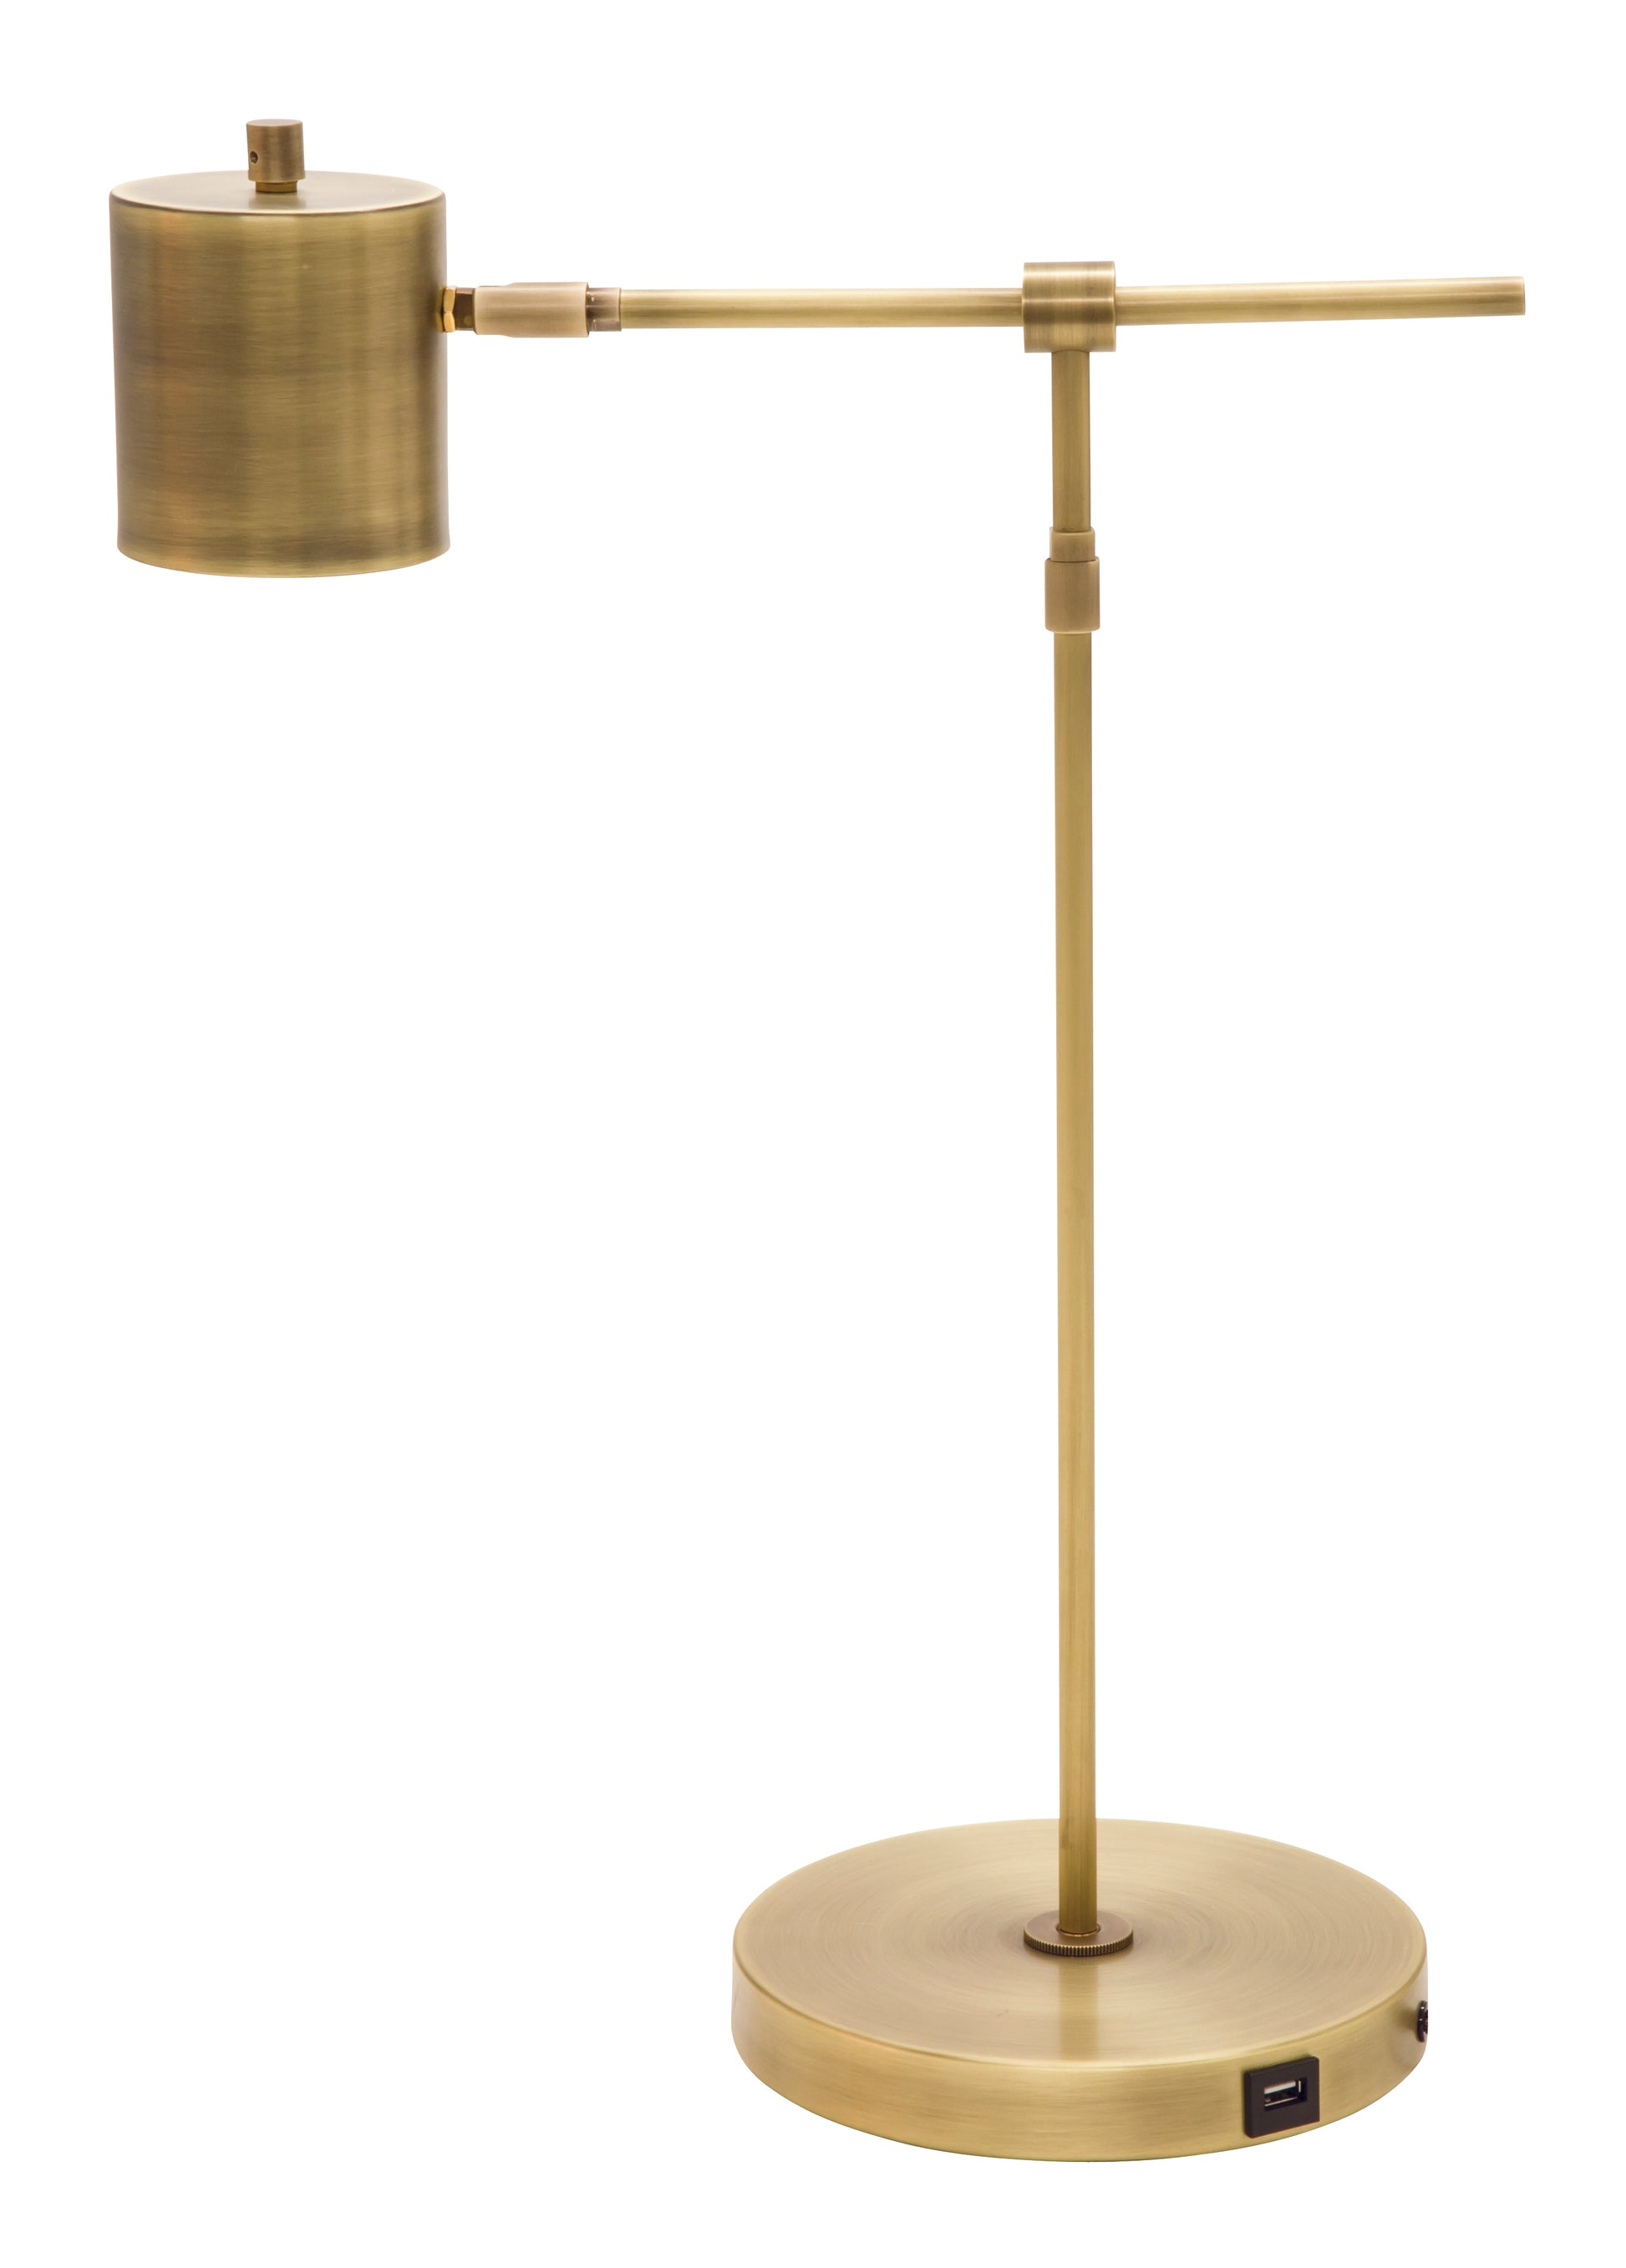 House of Troy Morris Adjustable LED Table Lamp with USB port in Antique Brass MO250-AB